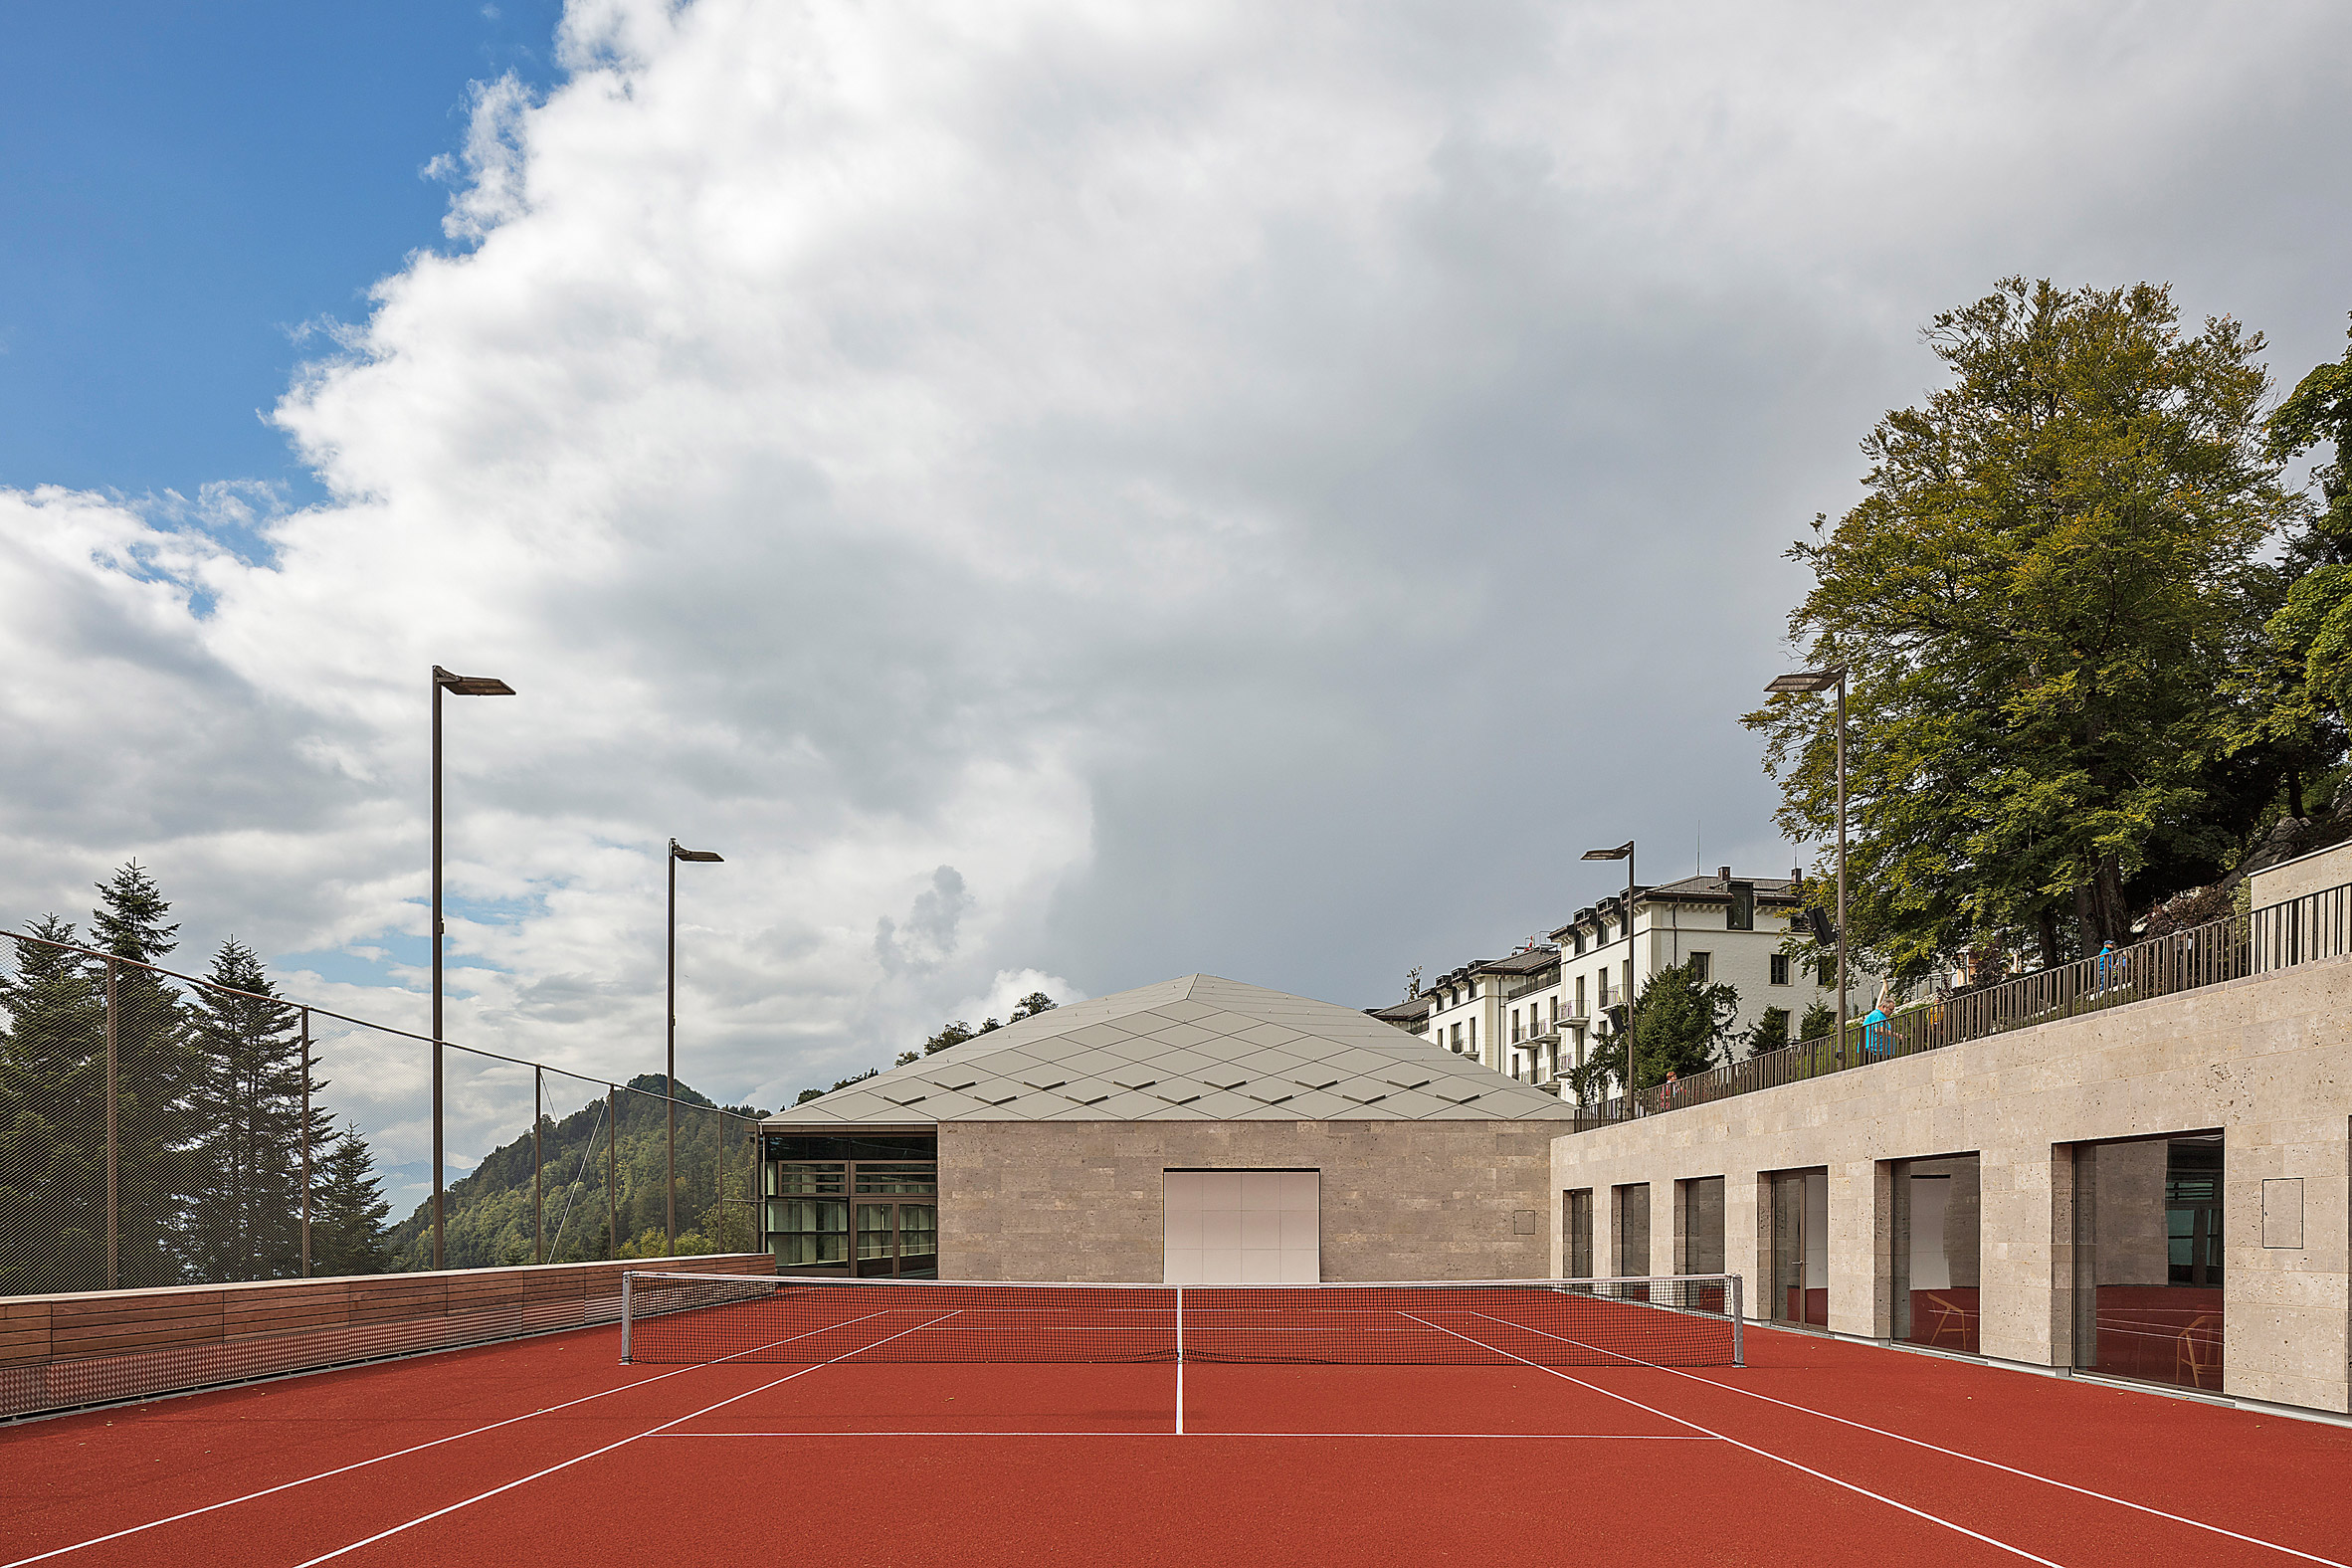 Outdoor court of Diamond Domes tennis courts designed by Rüssli Architekten with CLT roofs by Neue Holzbau in the Swiss Alps